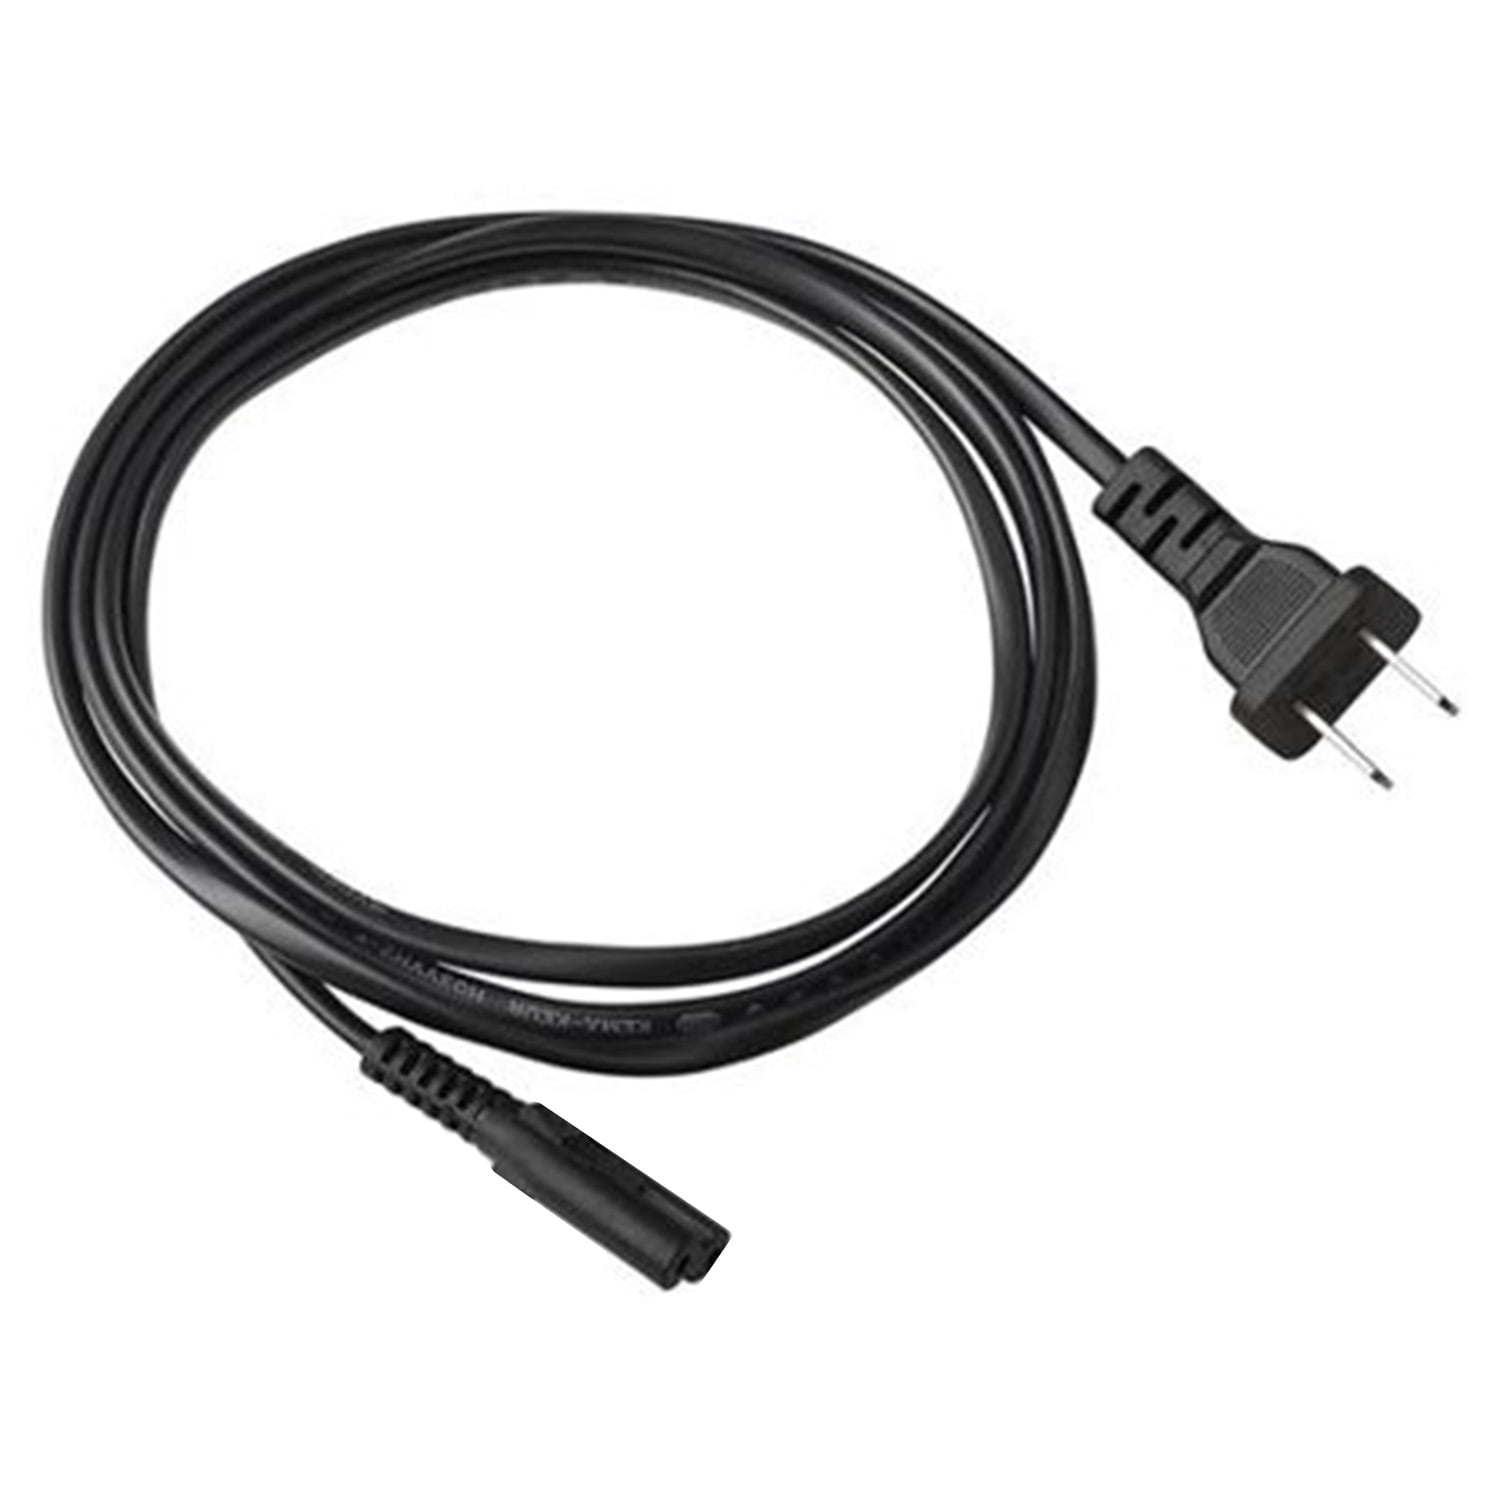 SatelliteSale 18AWG 2-Prong Square/Round Connector AC Universal Replacement Power Cable Universal Wire PVC Black Cord 6 feet - Walmart.com